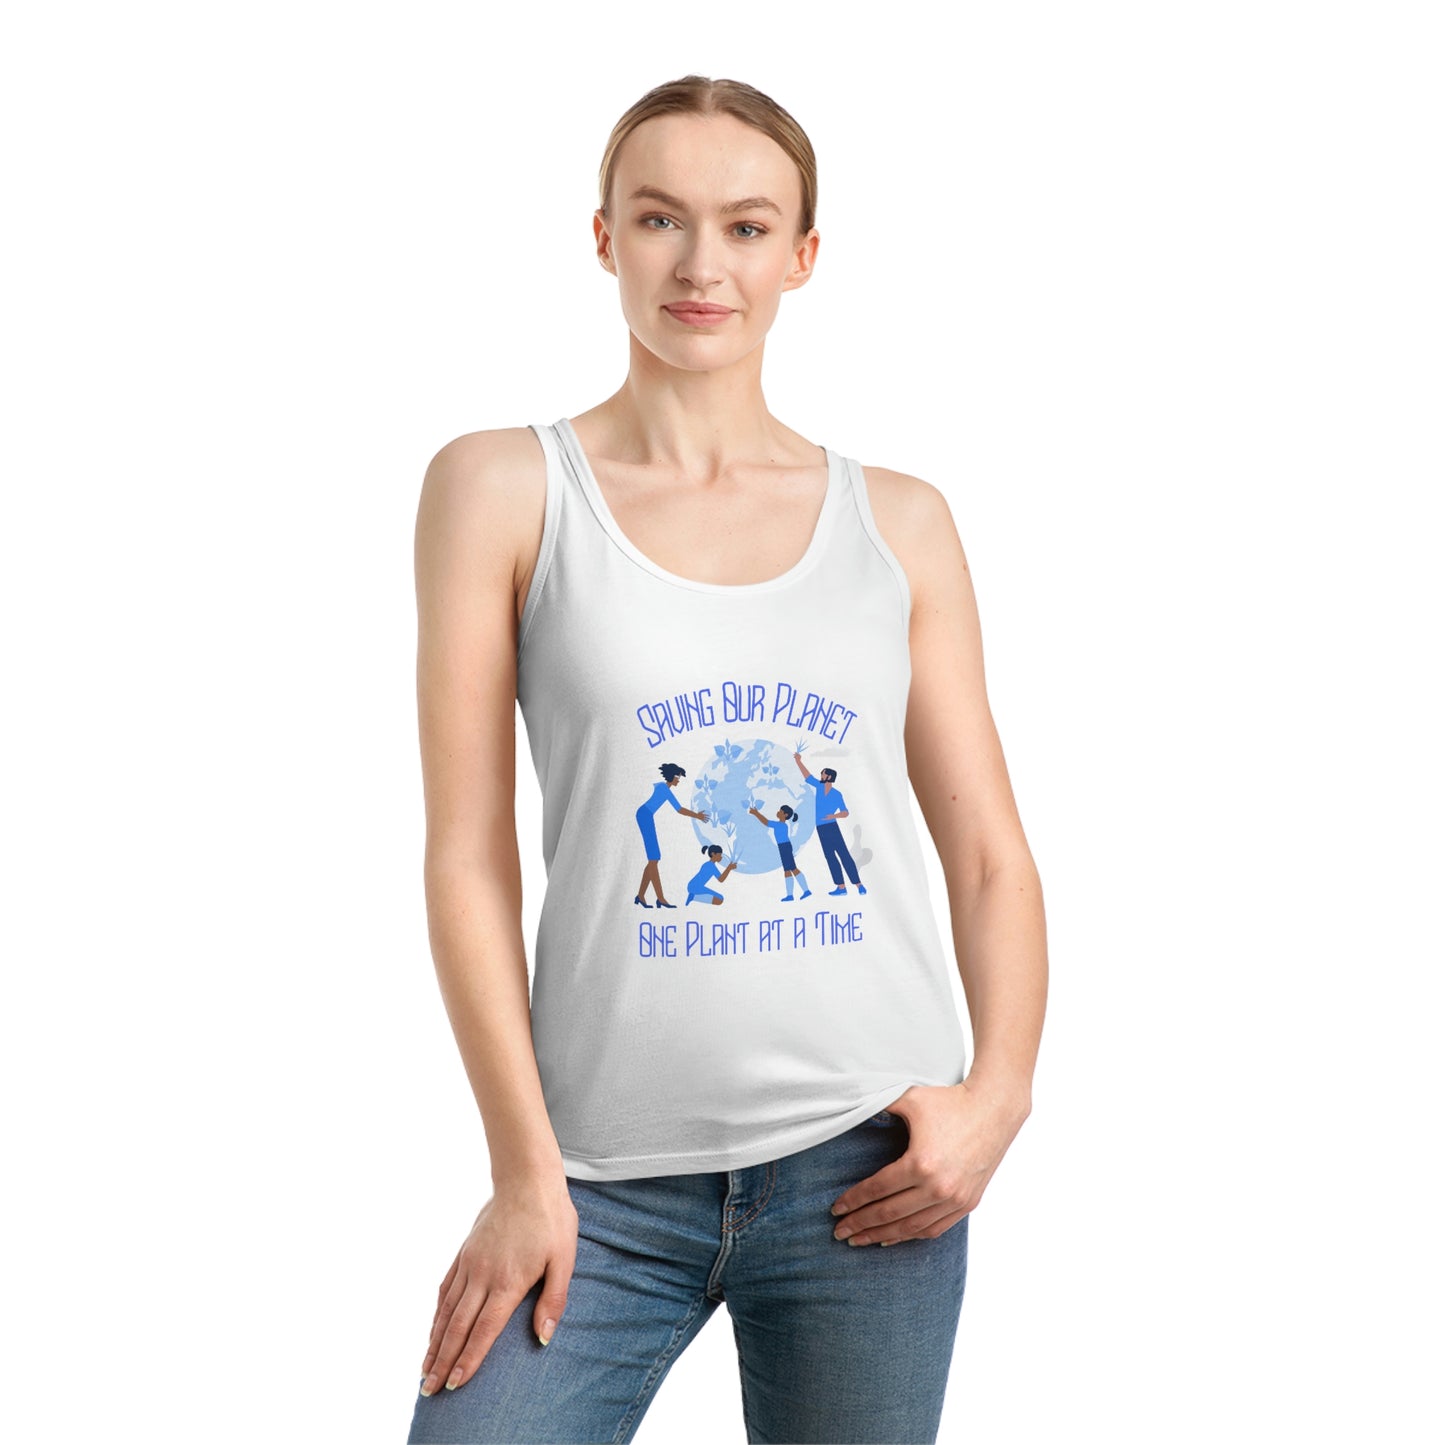 ‘Saving Our Planet One Plant at a Time’  Eco-Friendly, Printed Front & Back. Women's Dreamer Tank Top